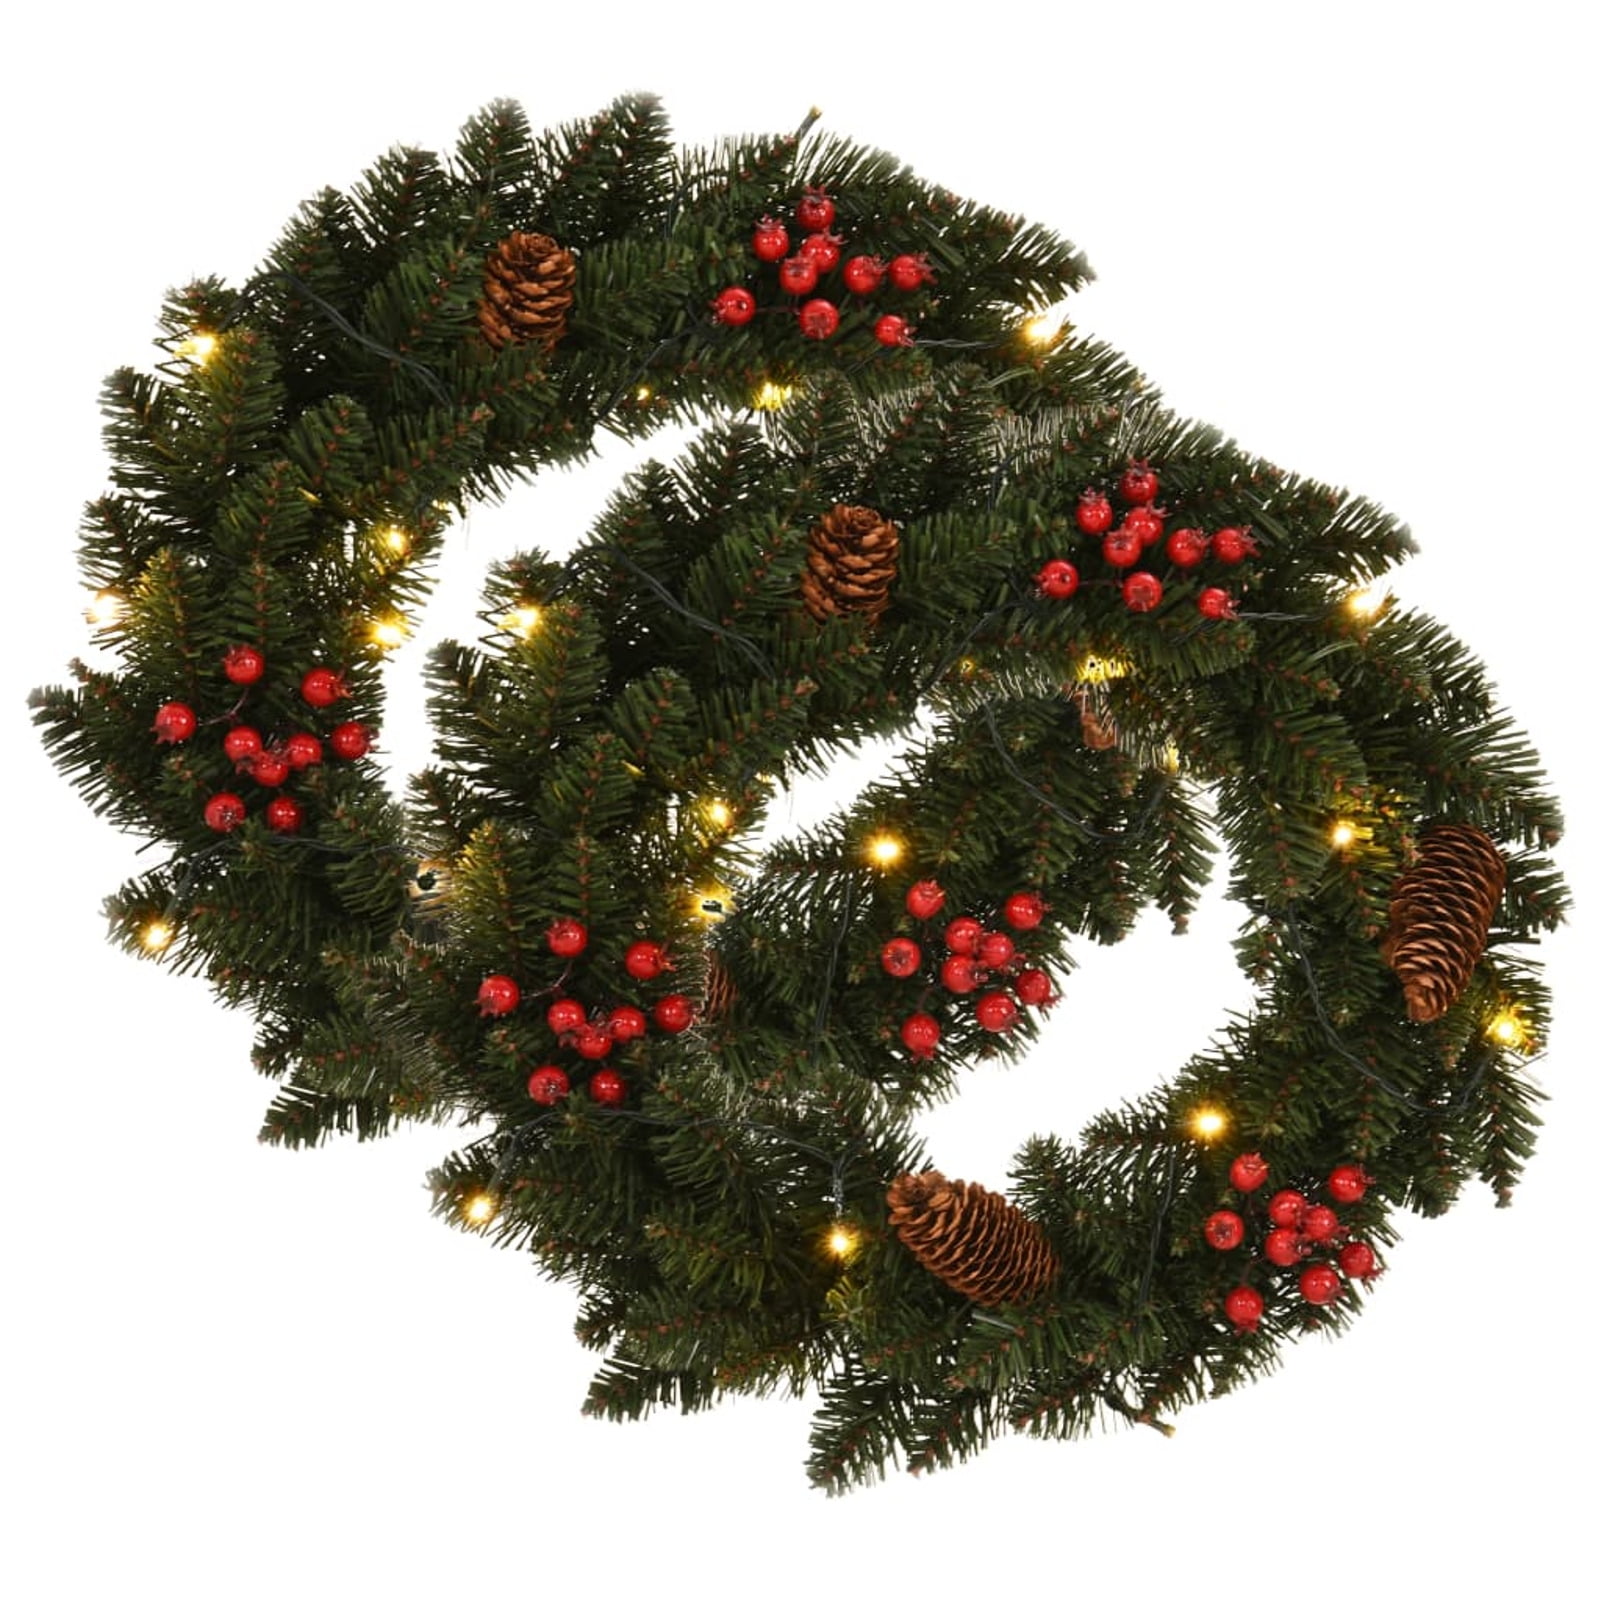 Details about   2' Prelit Winter Crystal Fir Wreath Lighted Holiday Christmas Outdoor Decoration 